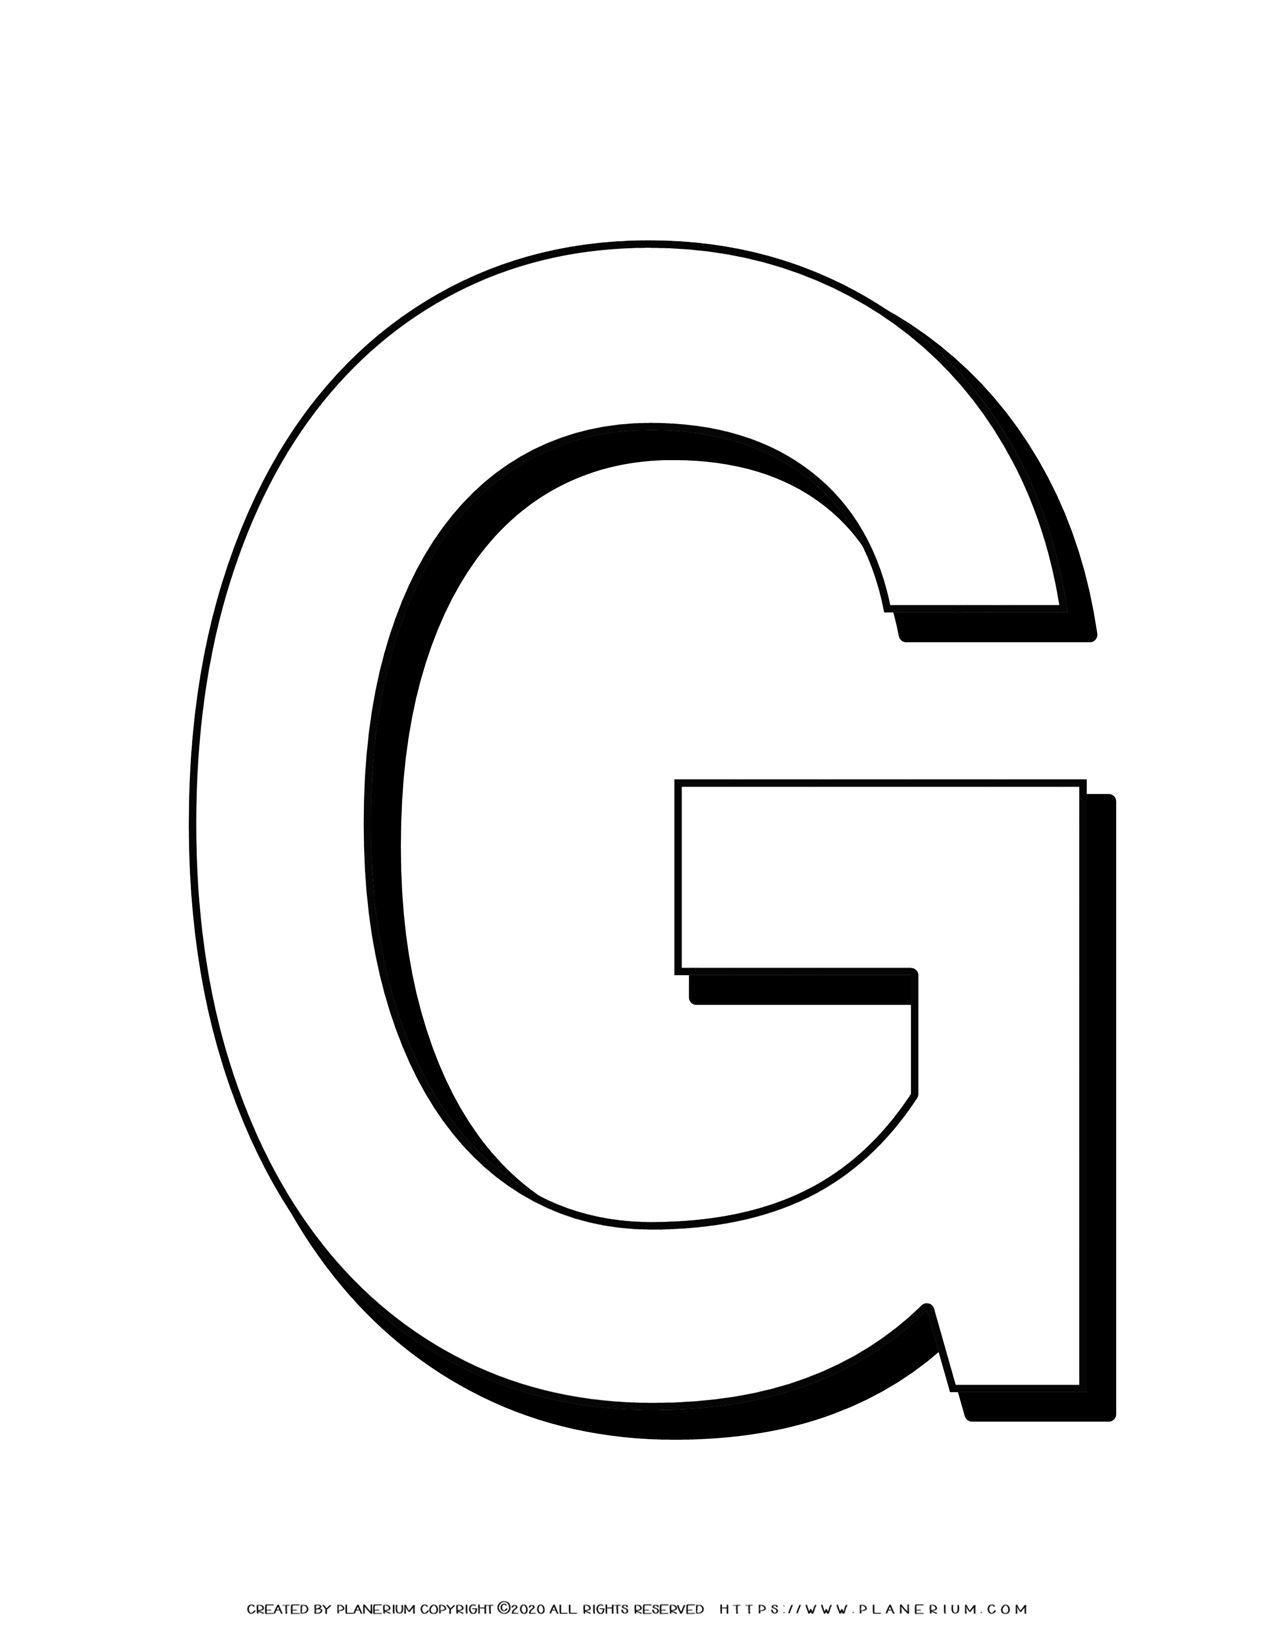 Letter G Coloring Page Alphabet Coloring Pages Alphab